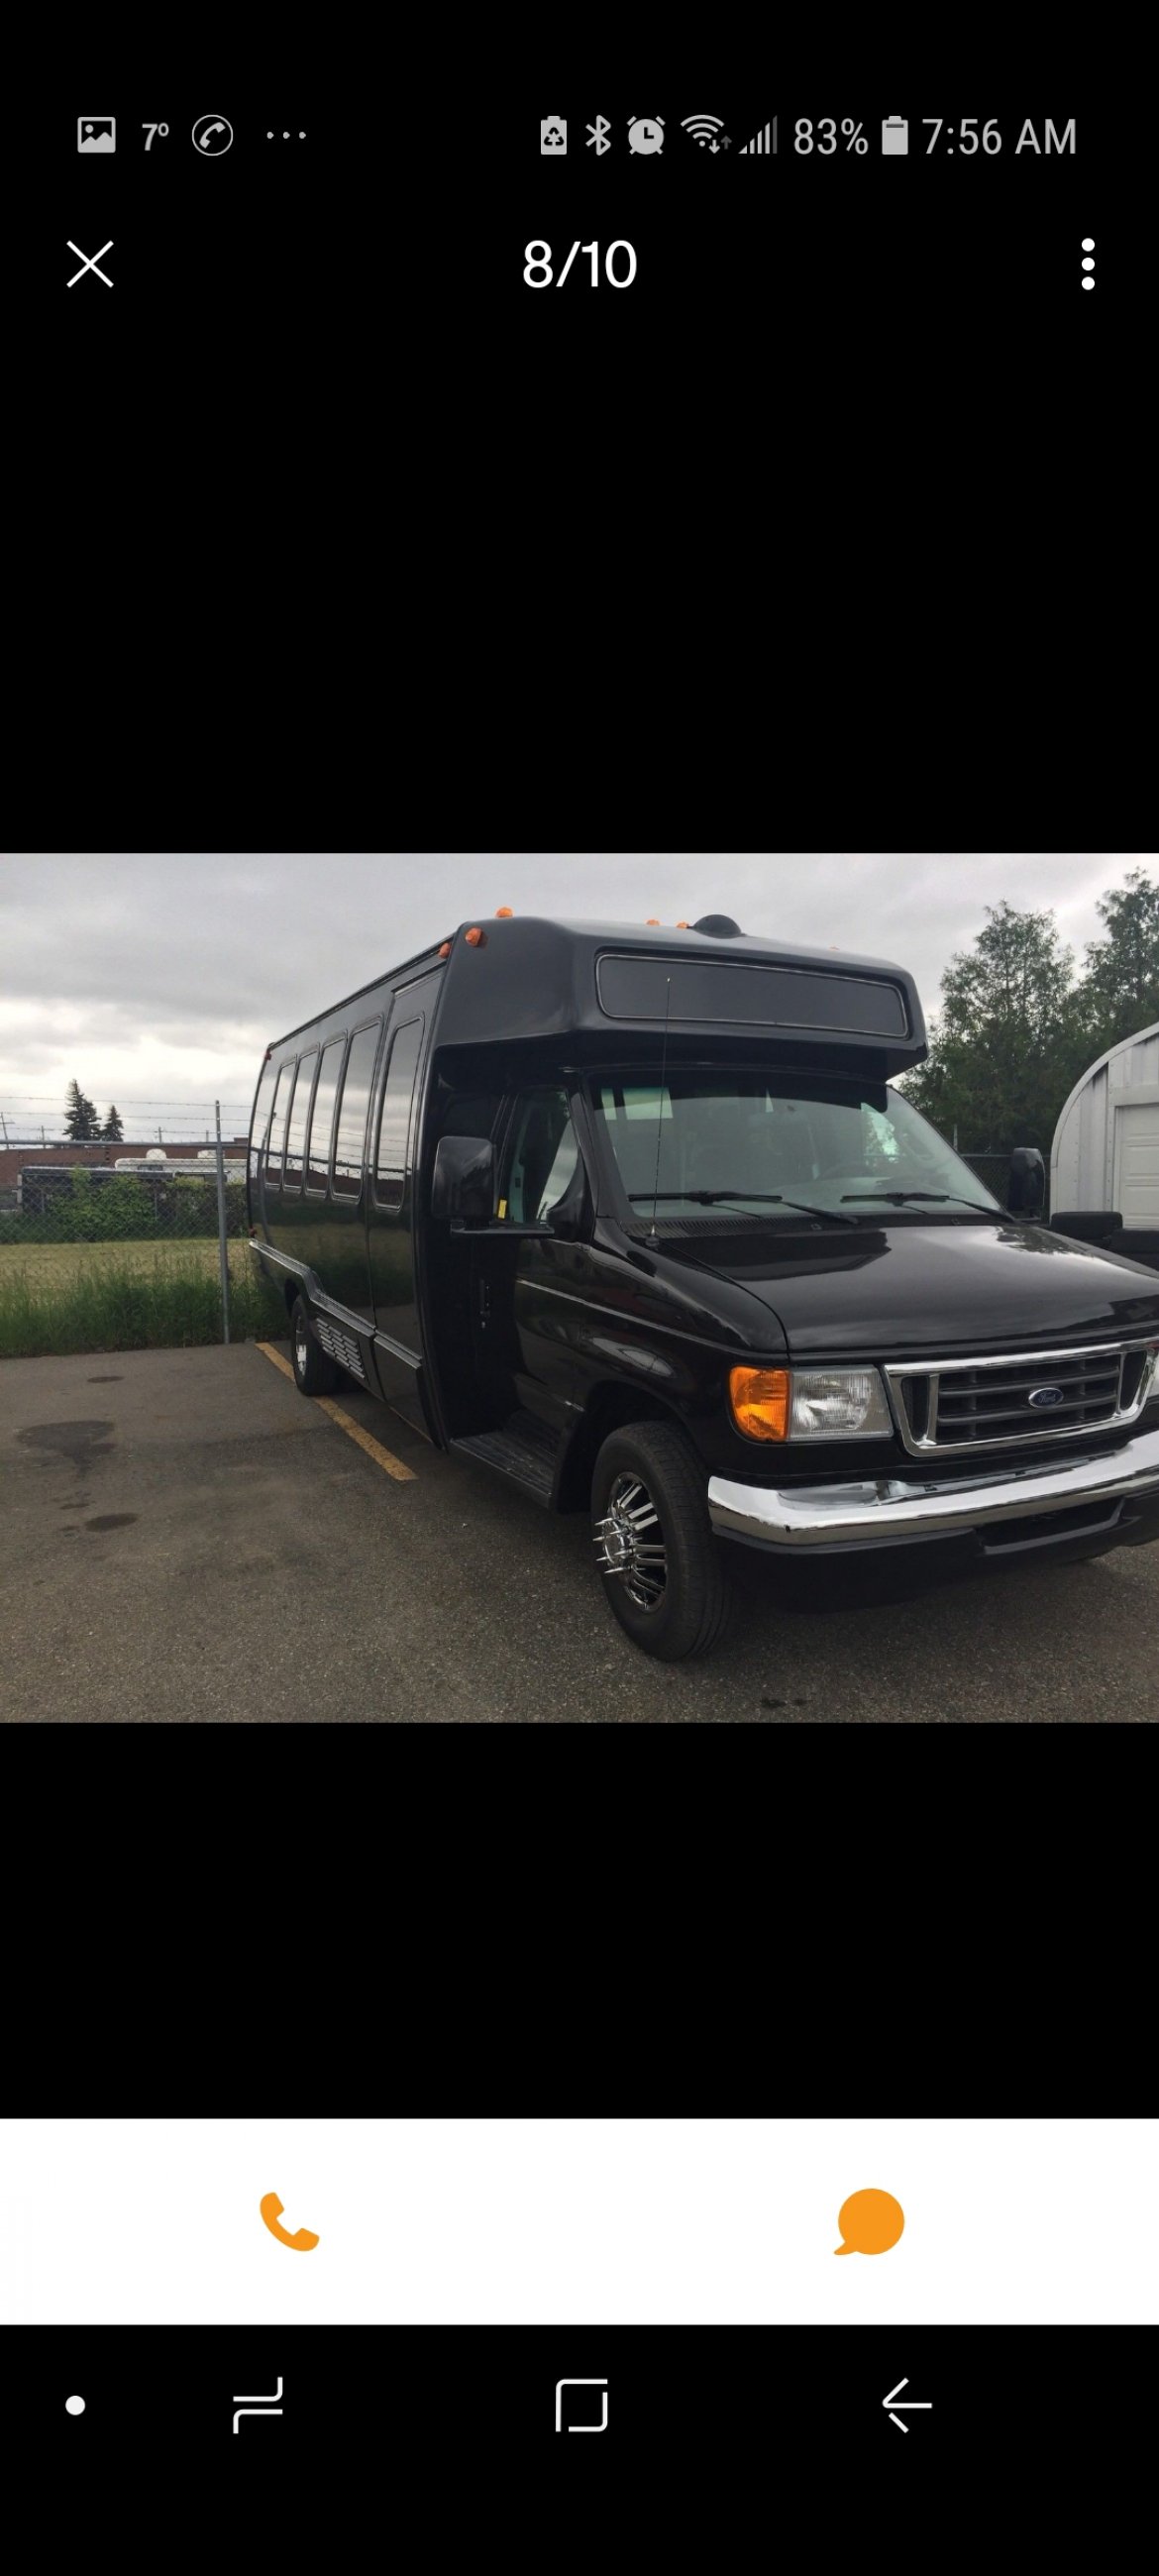 Limo Bus for sale: 2006 Ford E450 by Krystal